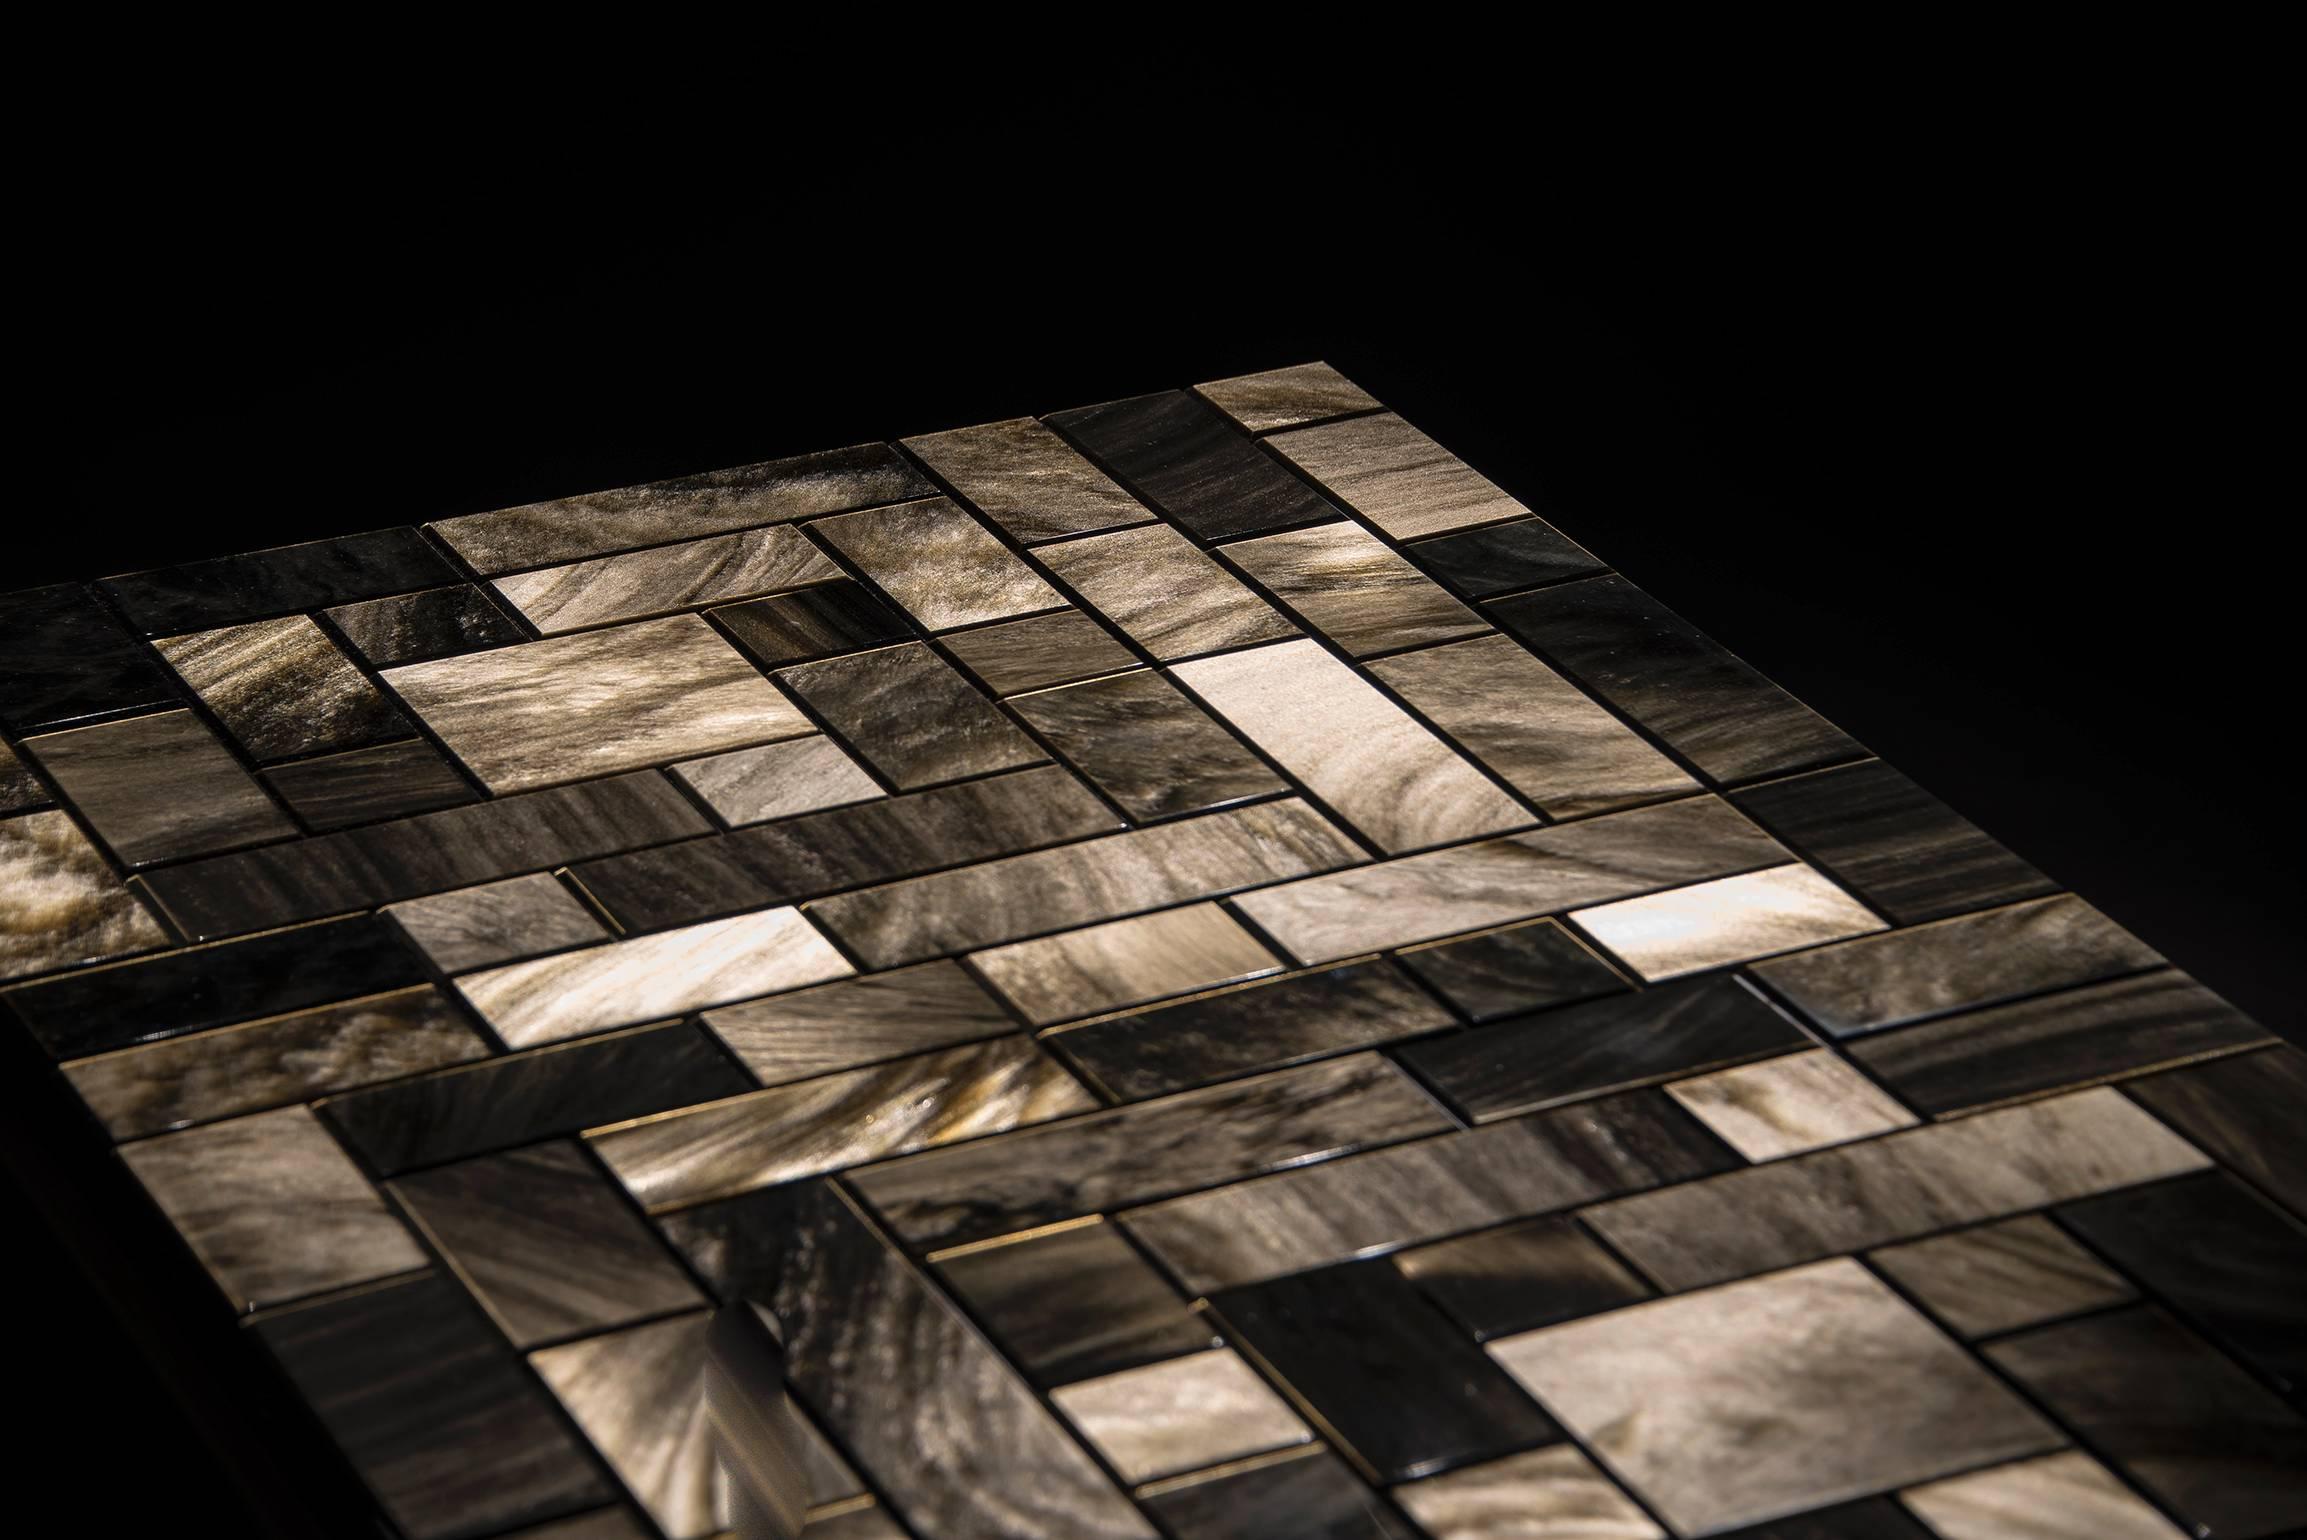 The Golden Universe Table by Gloria Cortina is made of bronze and golden obsidian, the rarest of all obsidians. The table’s simple and sophisticated frame supports a surface of finely cut tiles, arranged in a glittering, reflective pattern of